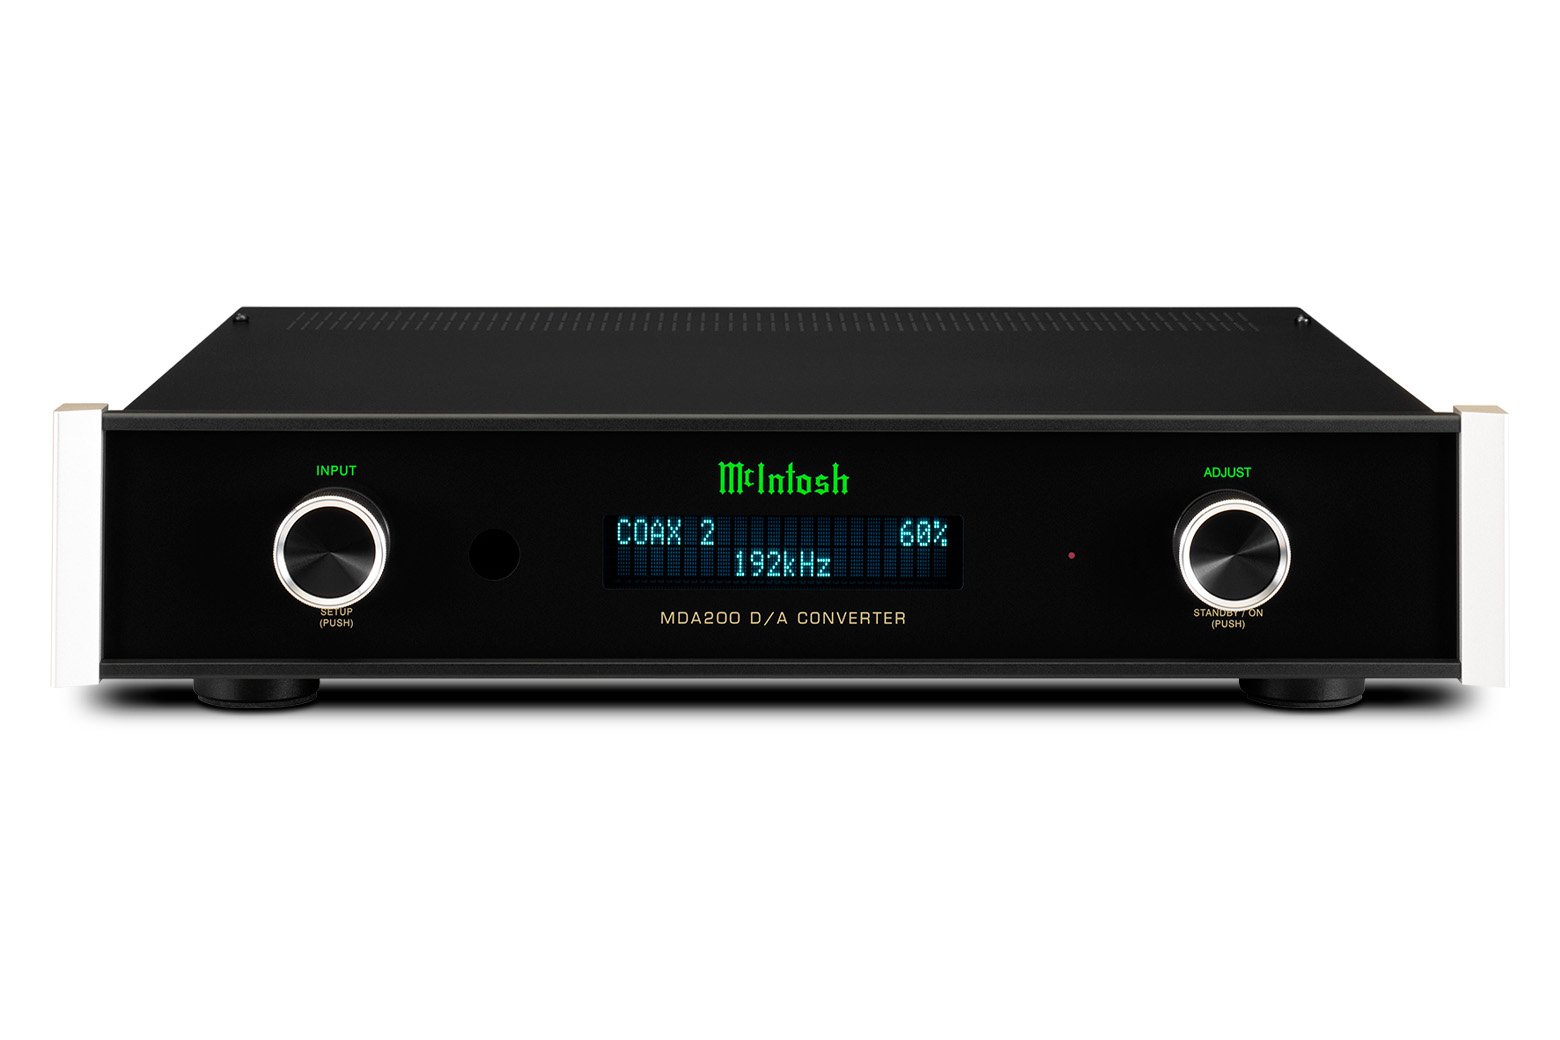 McIntosh MDA200 D/A Converters (In-Store Purchases Only)